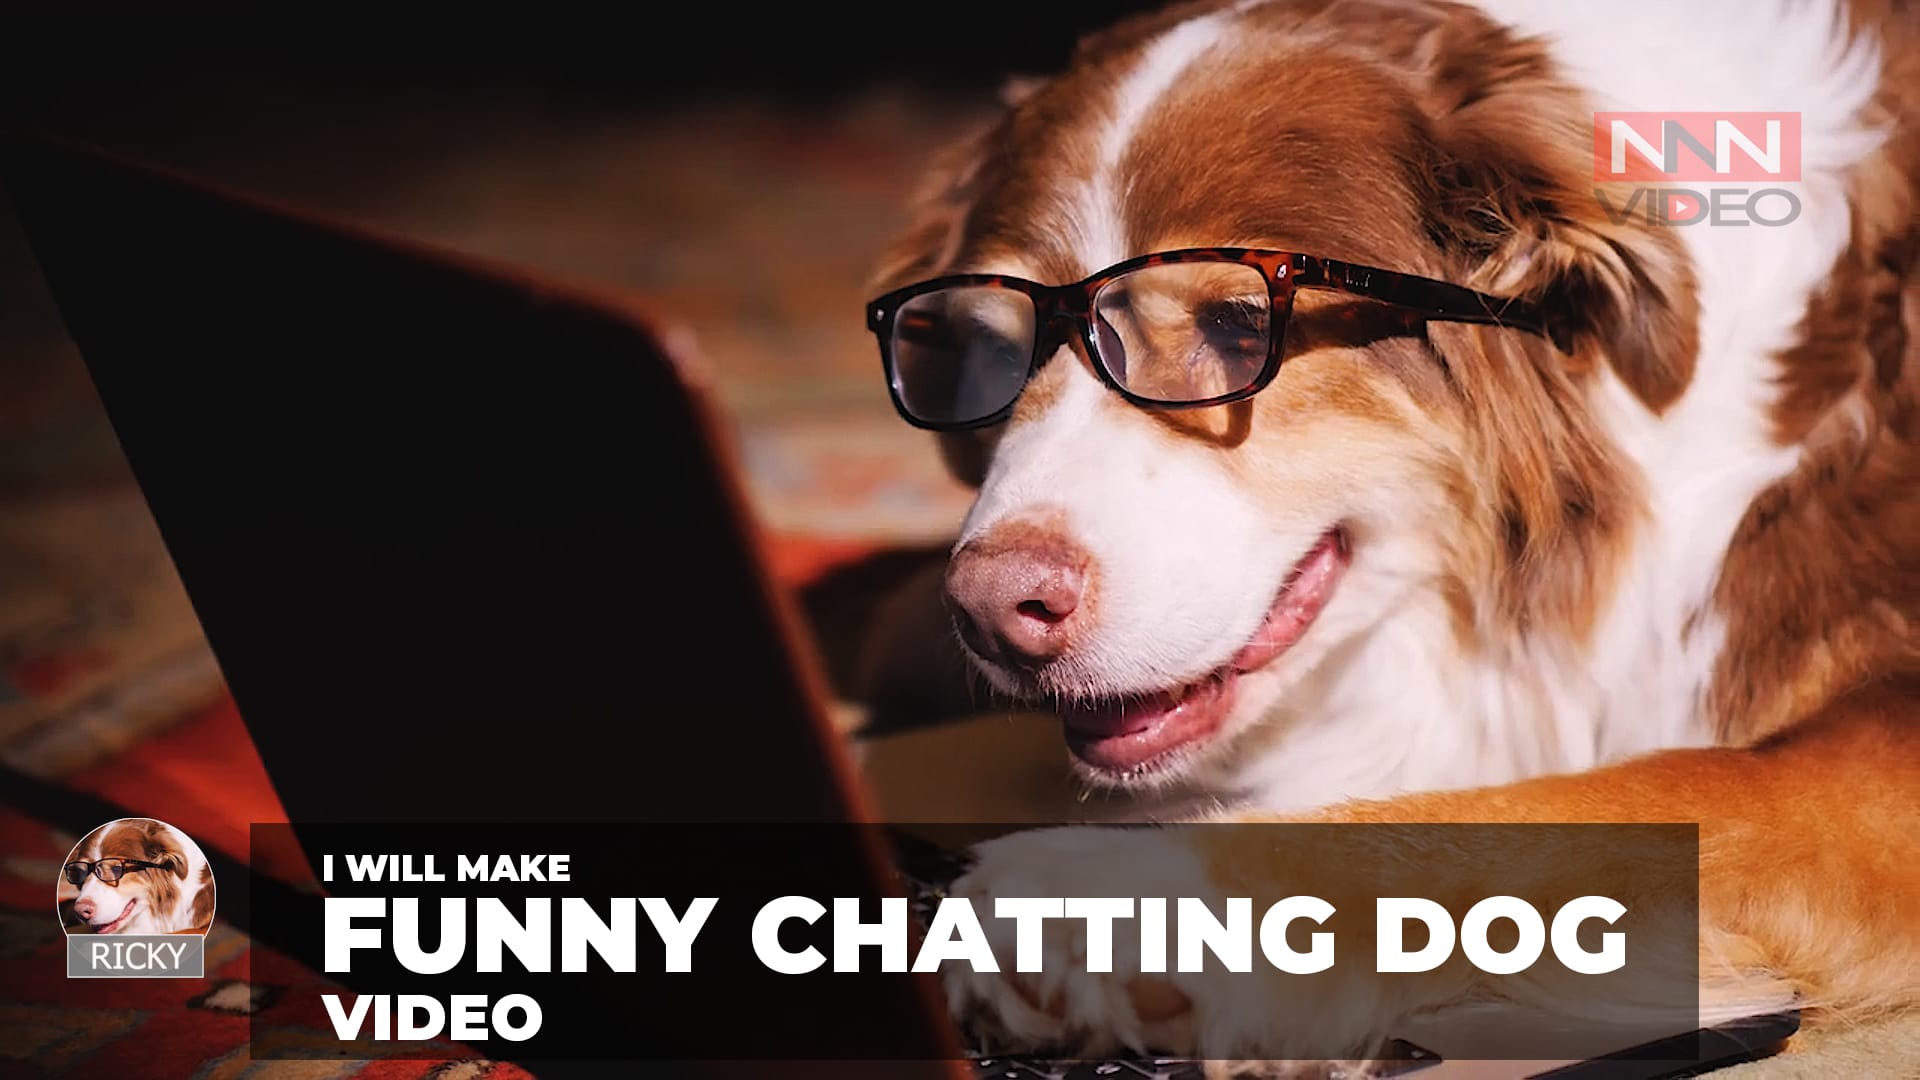 Make short funny video ads with funny chatting dog by Tuanla85 | Fiverr